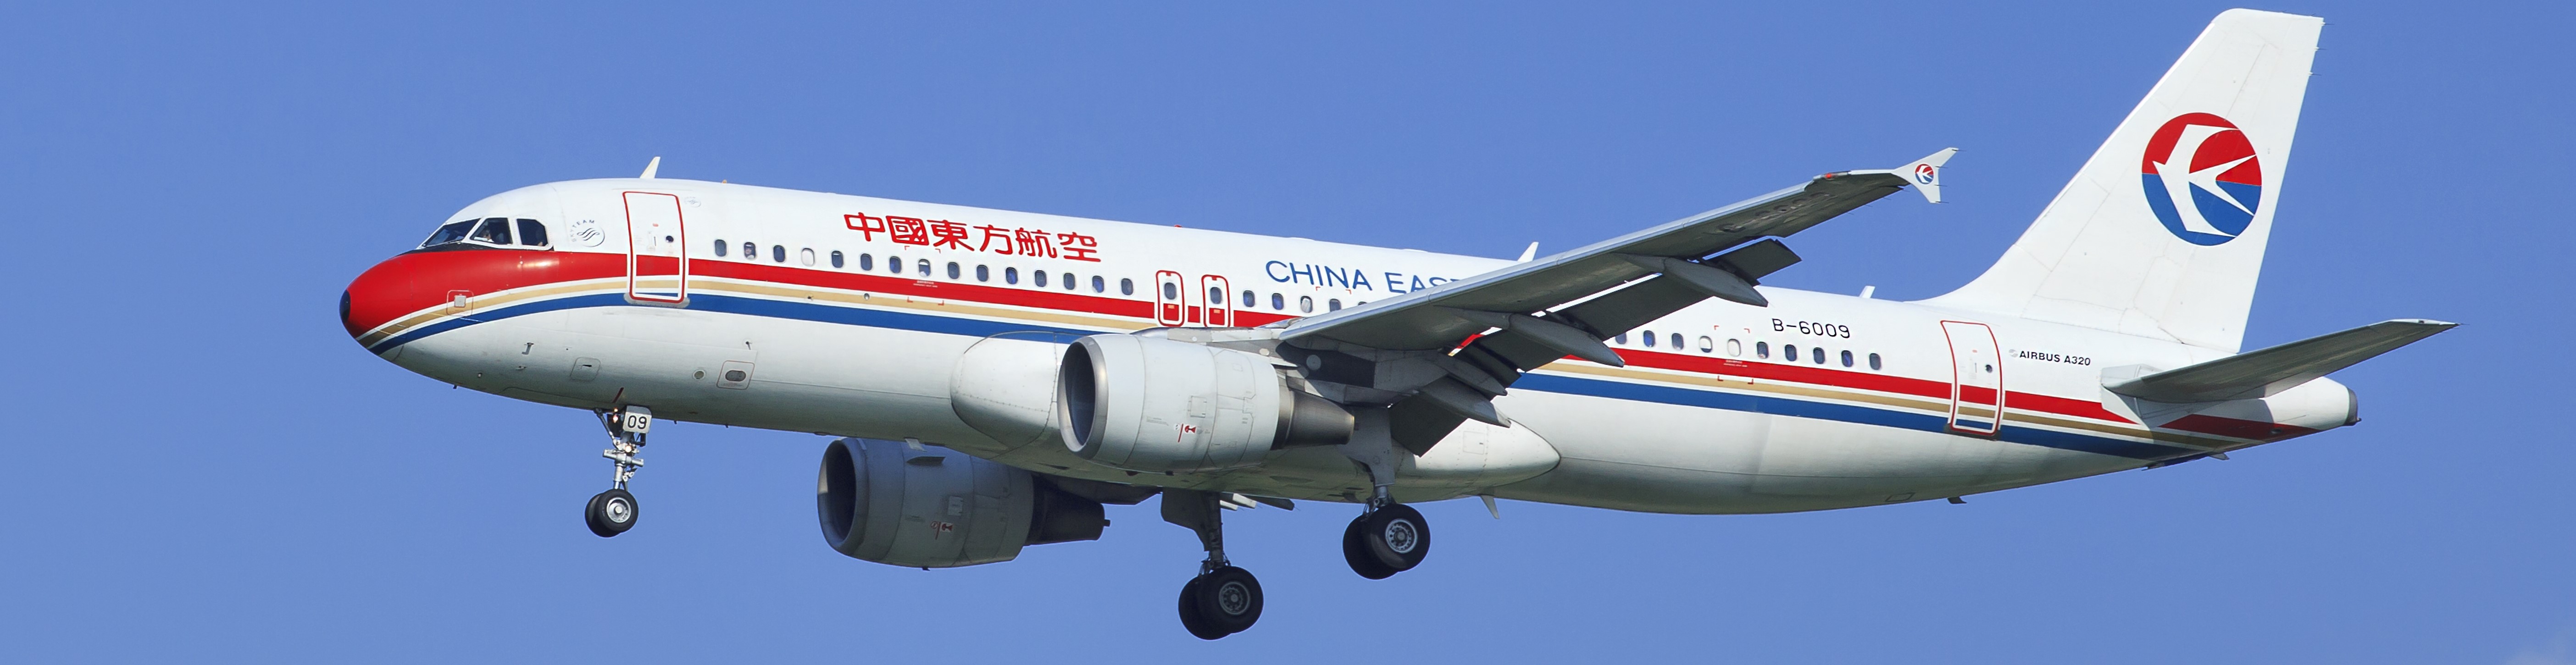 New Sabre technology enables proactive approach to China Eastern’s fare setting strategy